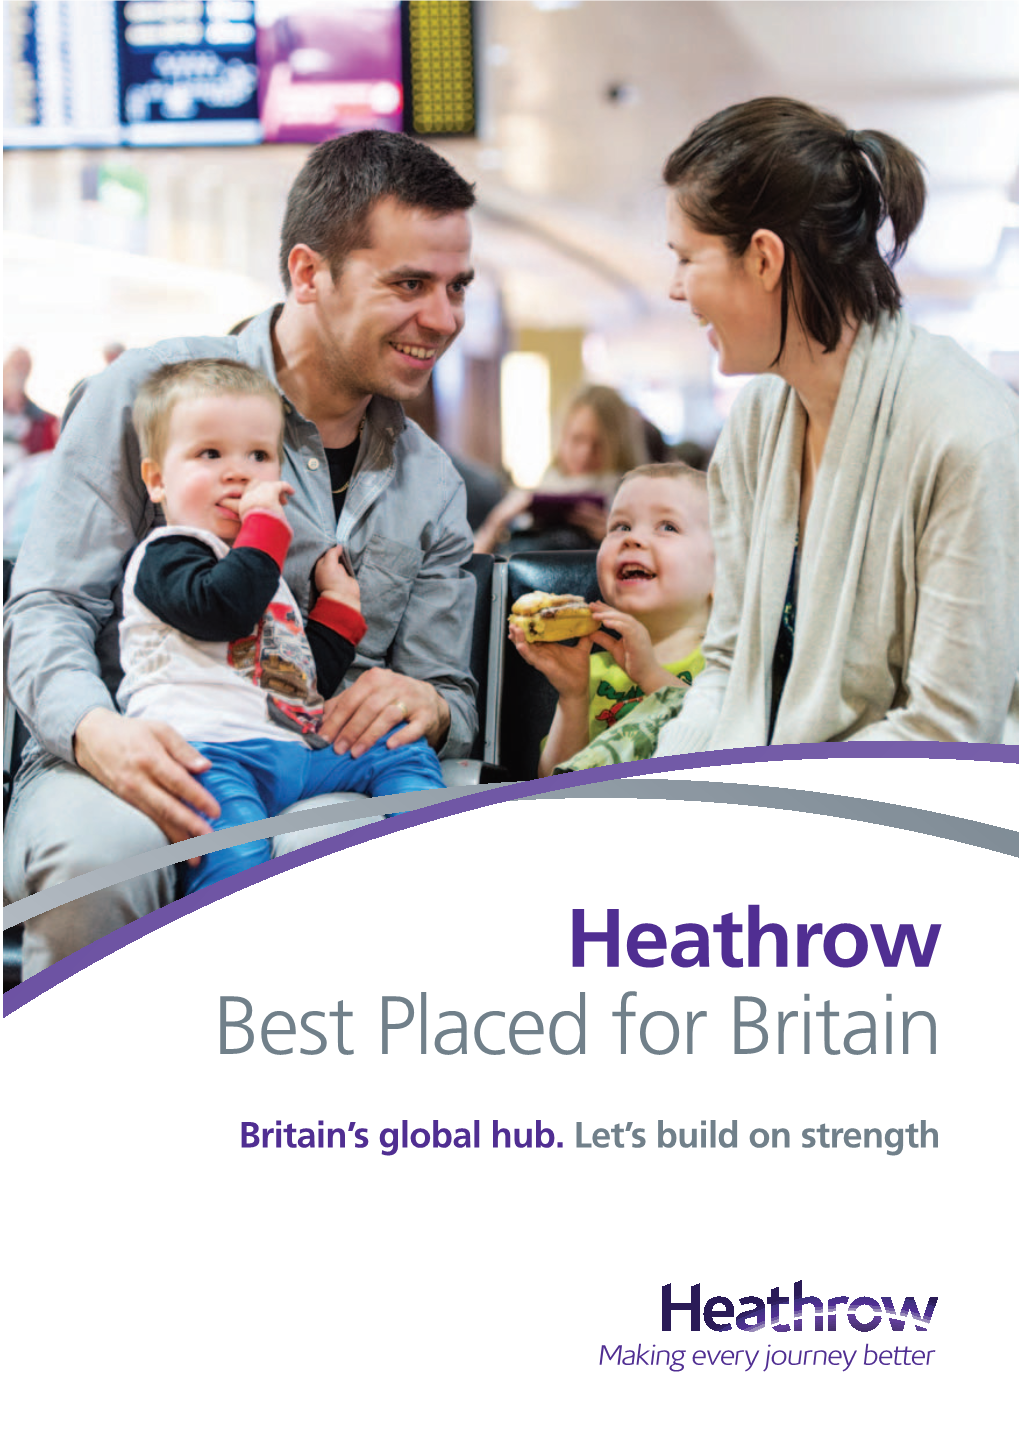 Heathrow Best Placed for Britain